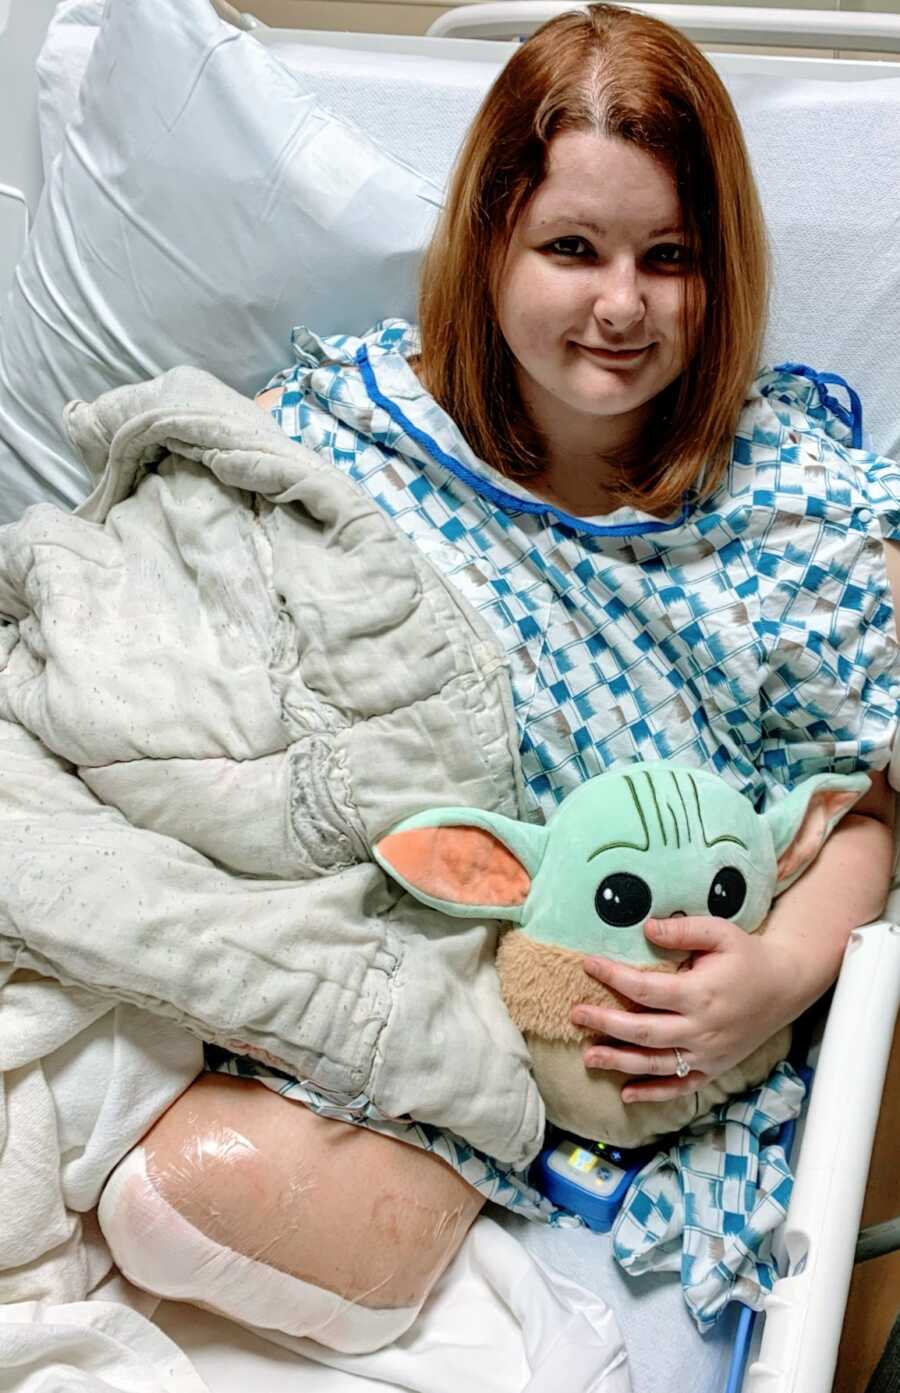 An amputee sitting in a hospital bed